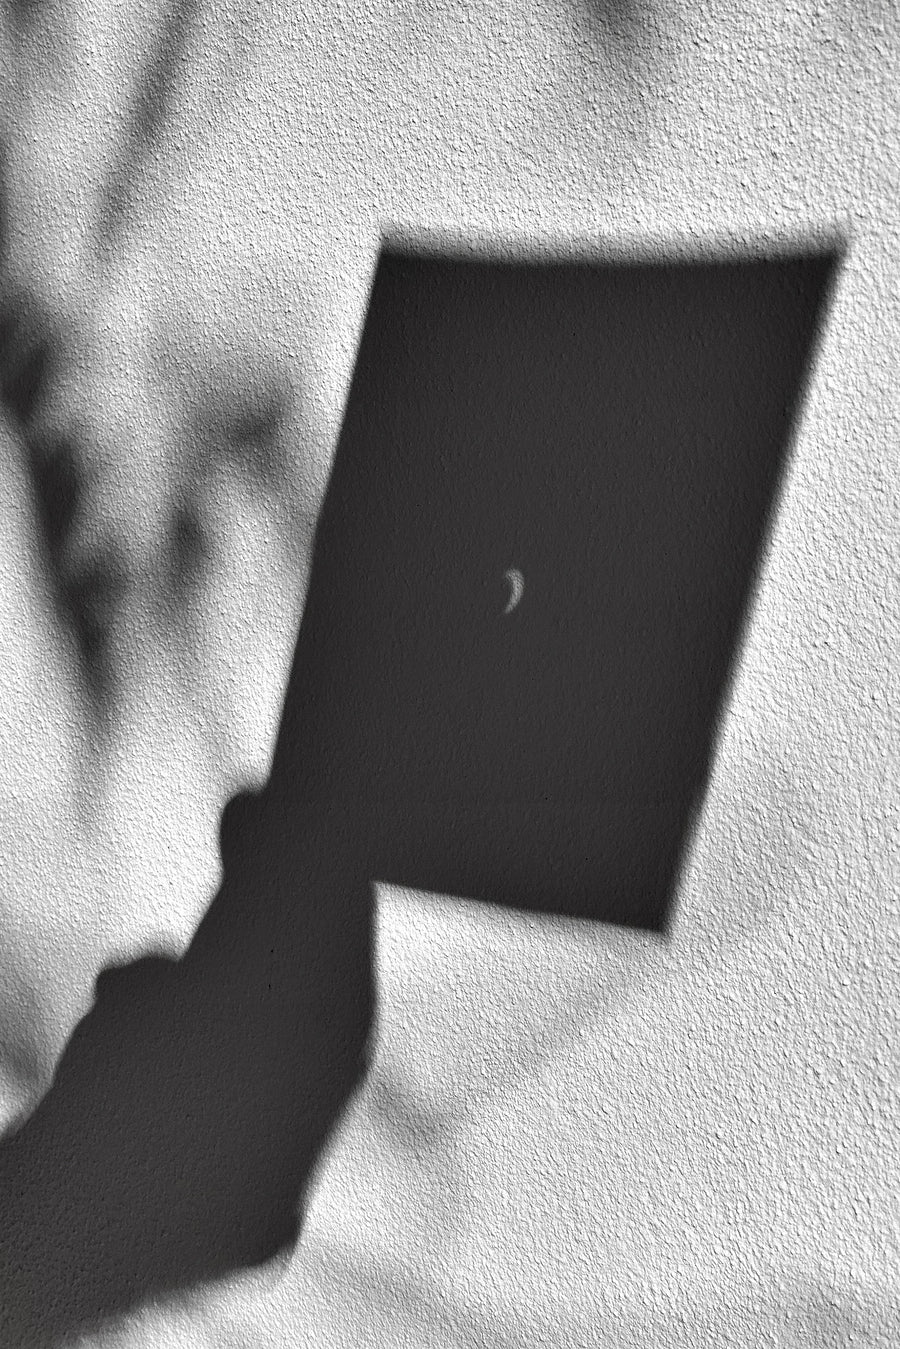 Solar Eclipse 20/04/2023 LIMITED EDITION 1/1 33x50cm Framed in black with non-reflective glass